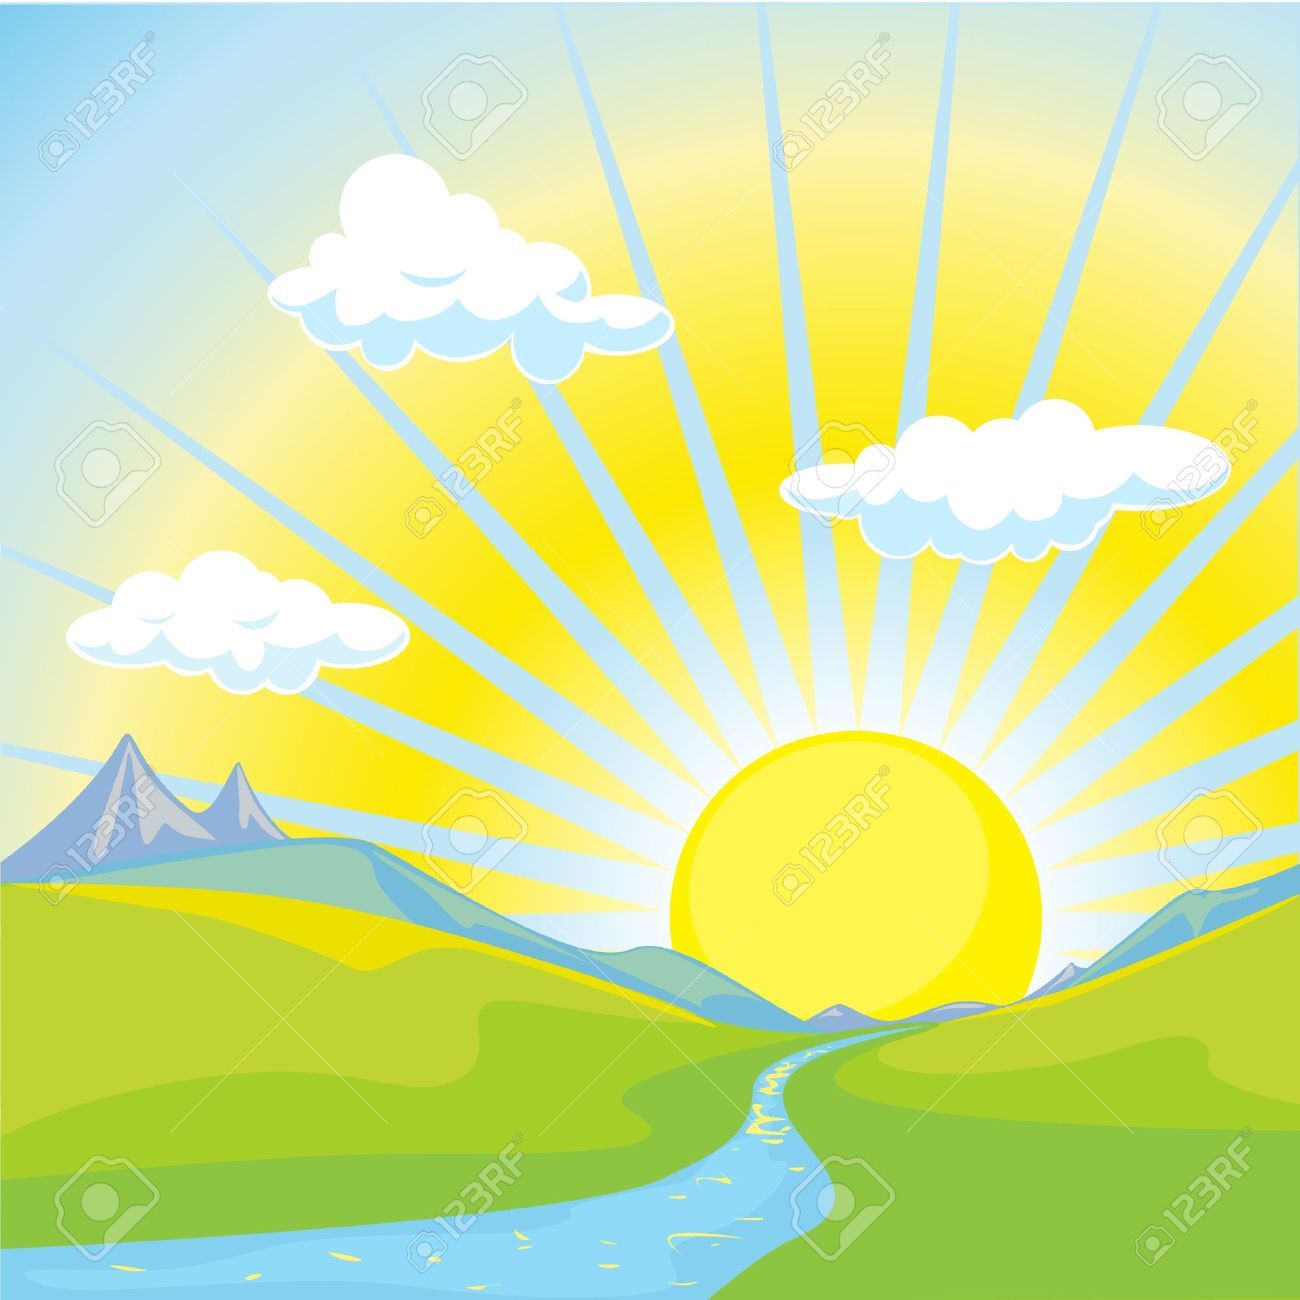 Over some mountains oc. Morning clipart mountain sunrise